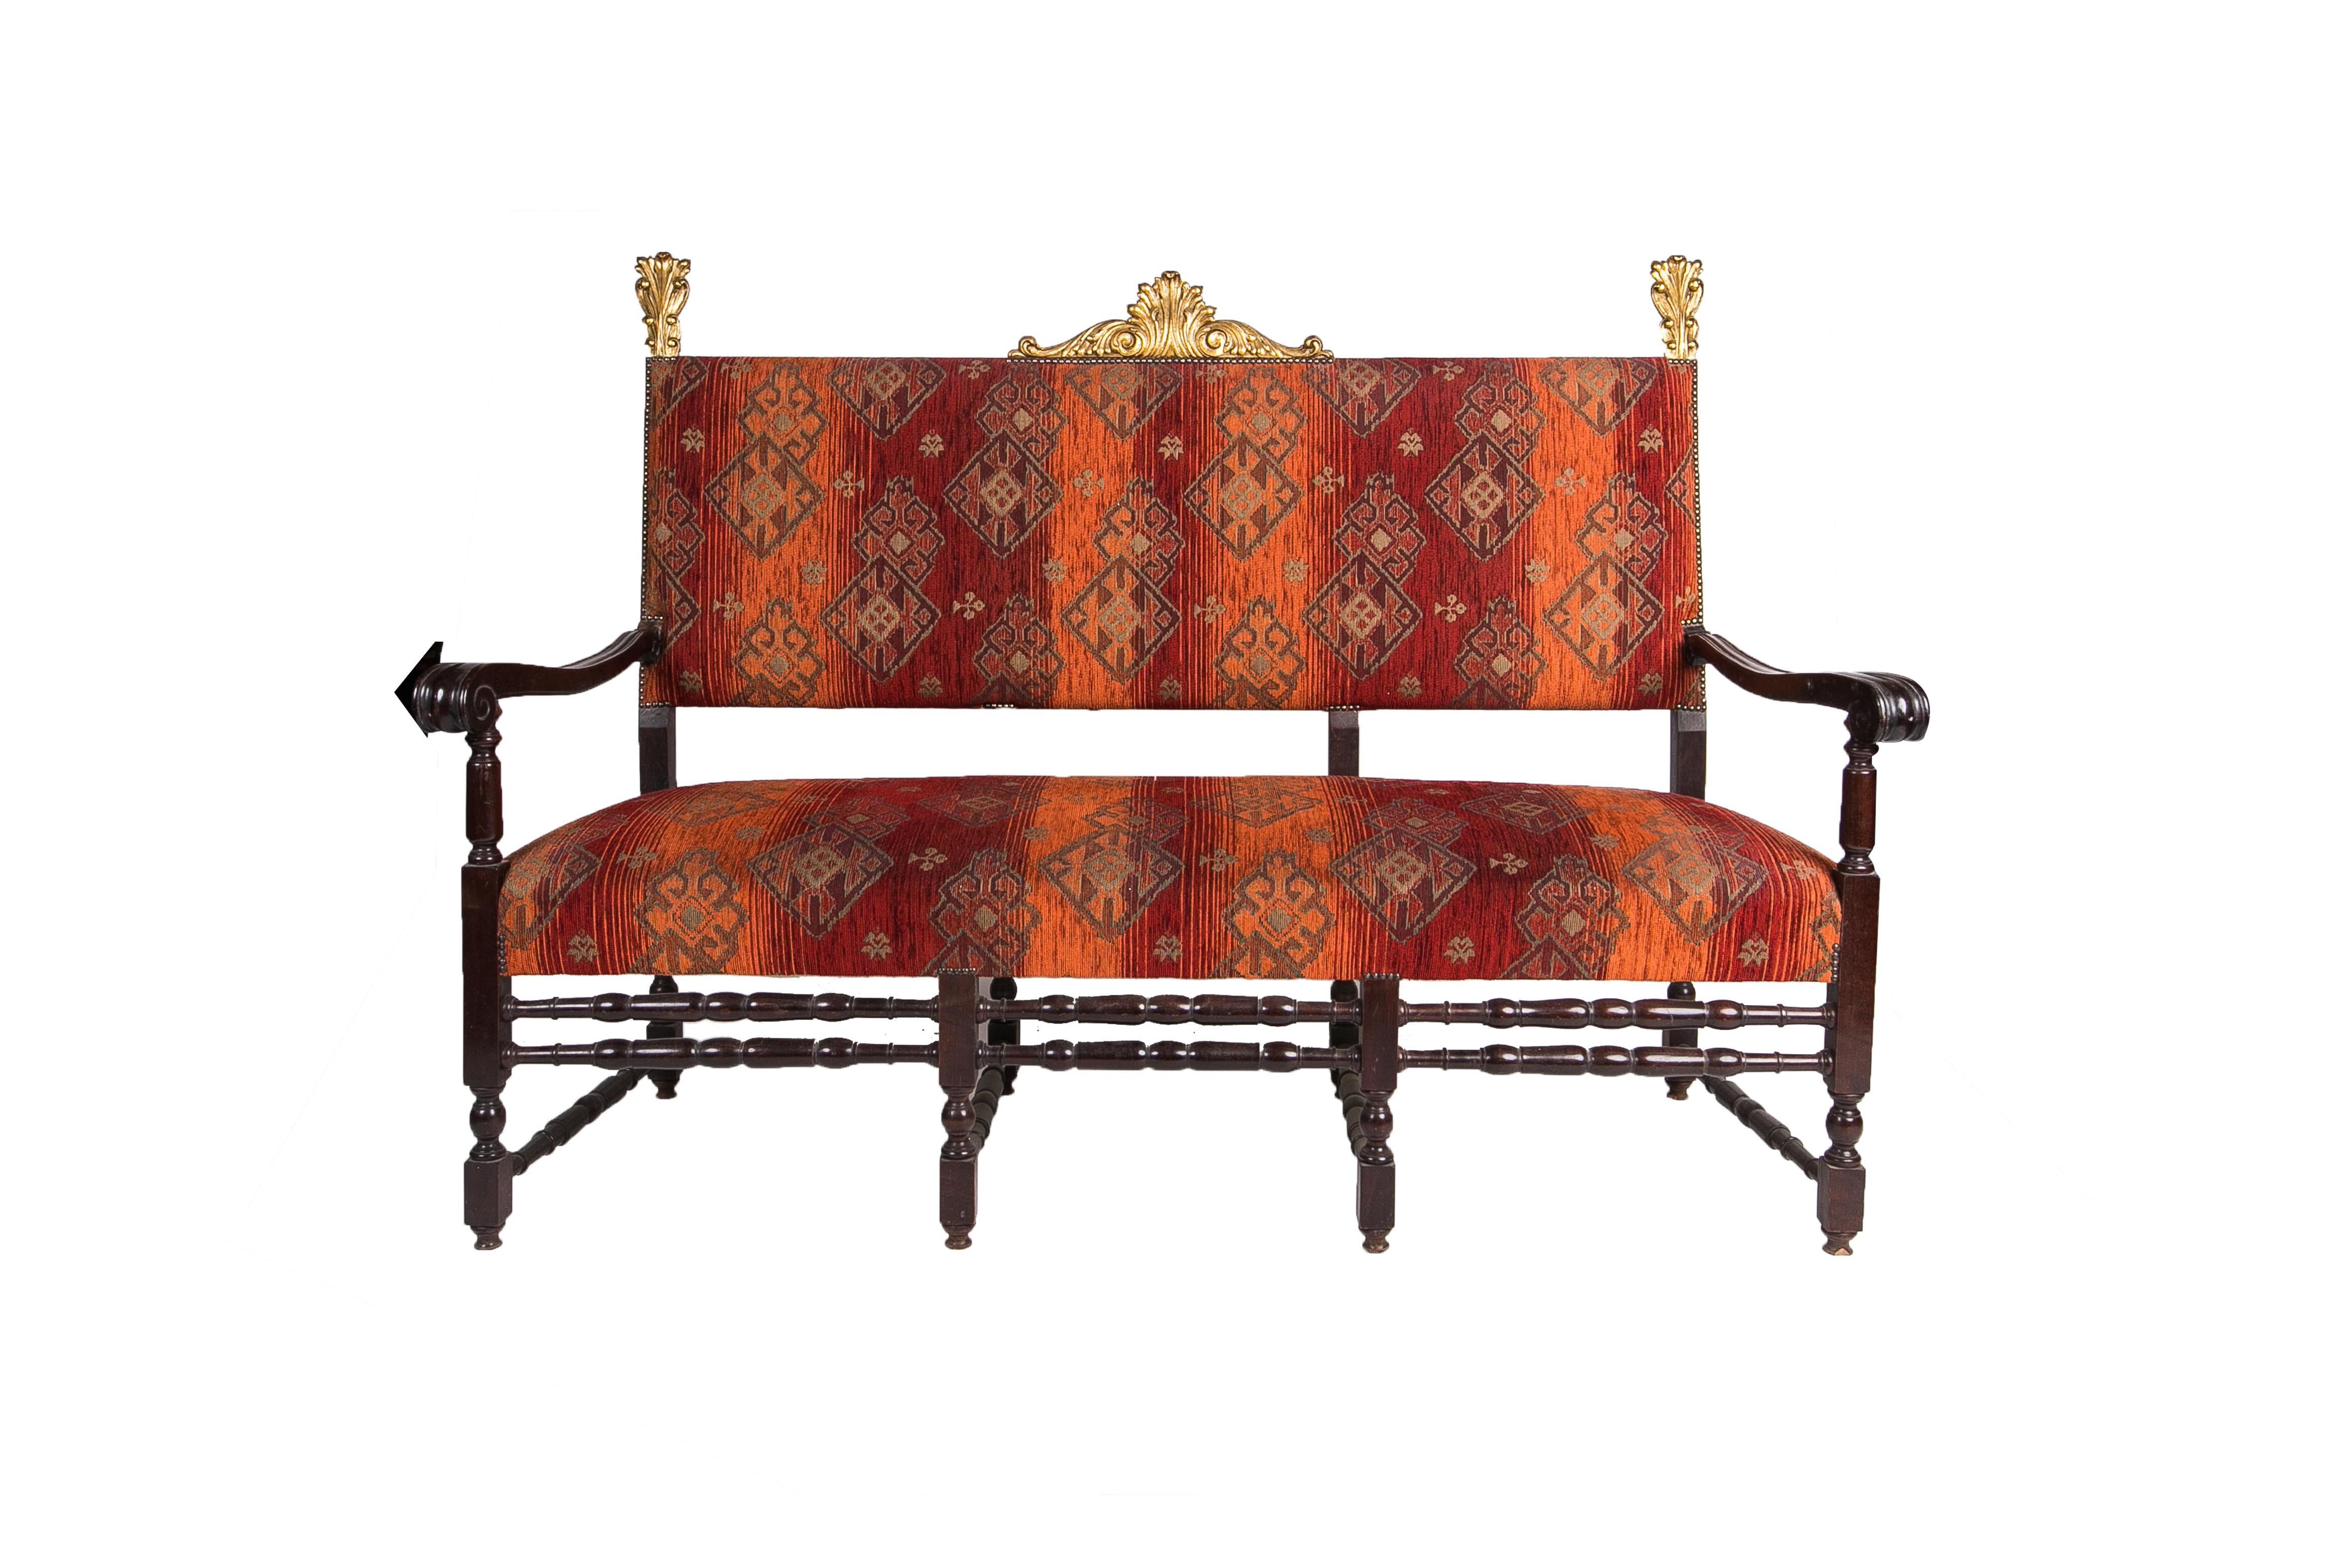 Carved walnut seating ensemble from the 19th century, with gilded decor. The pieces are in good, restaured condition.
(H/W/D)

Canape: 128 x 173 x 73 cm
Armchairs: 117 x 70 x 66 cm (2 pieces)